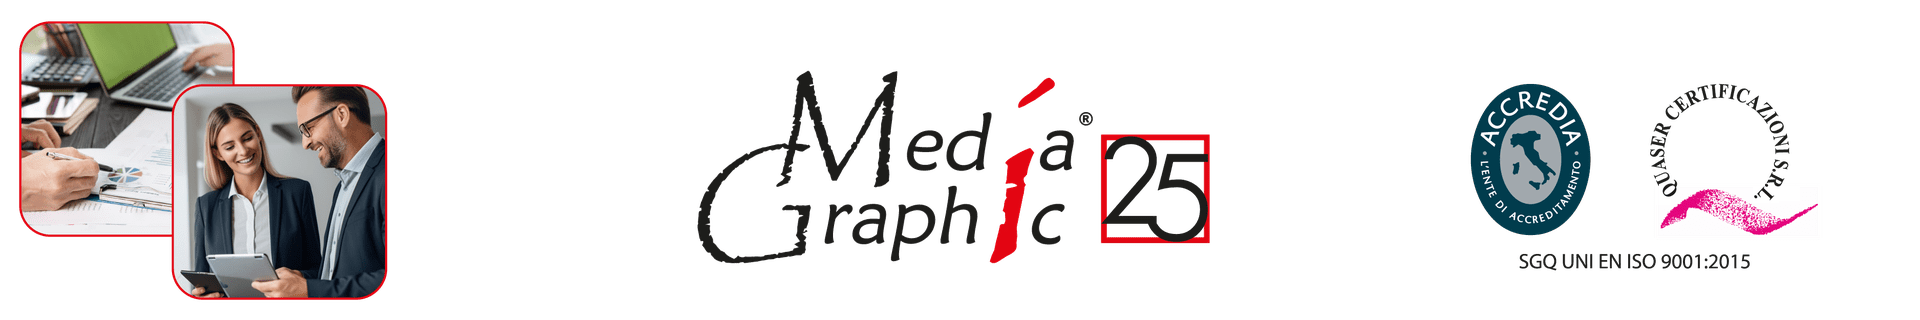 Mediagraphic footer 